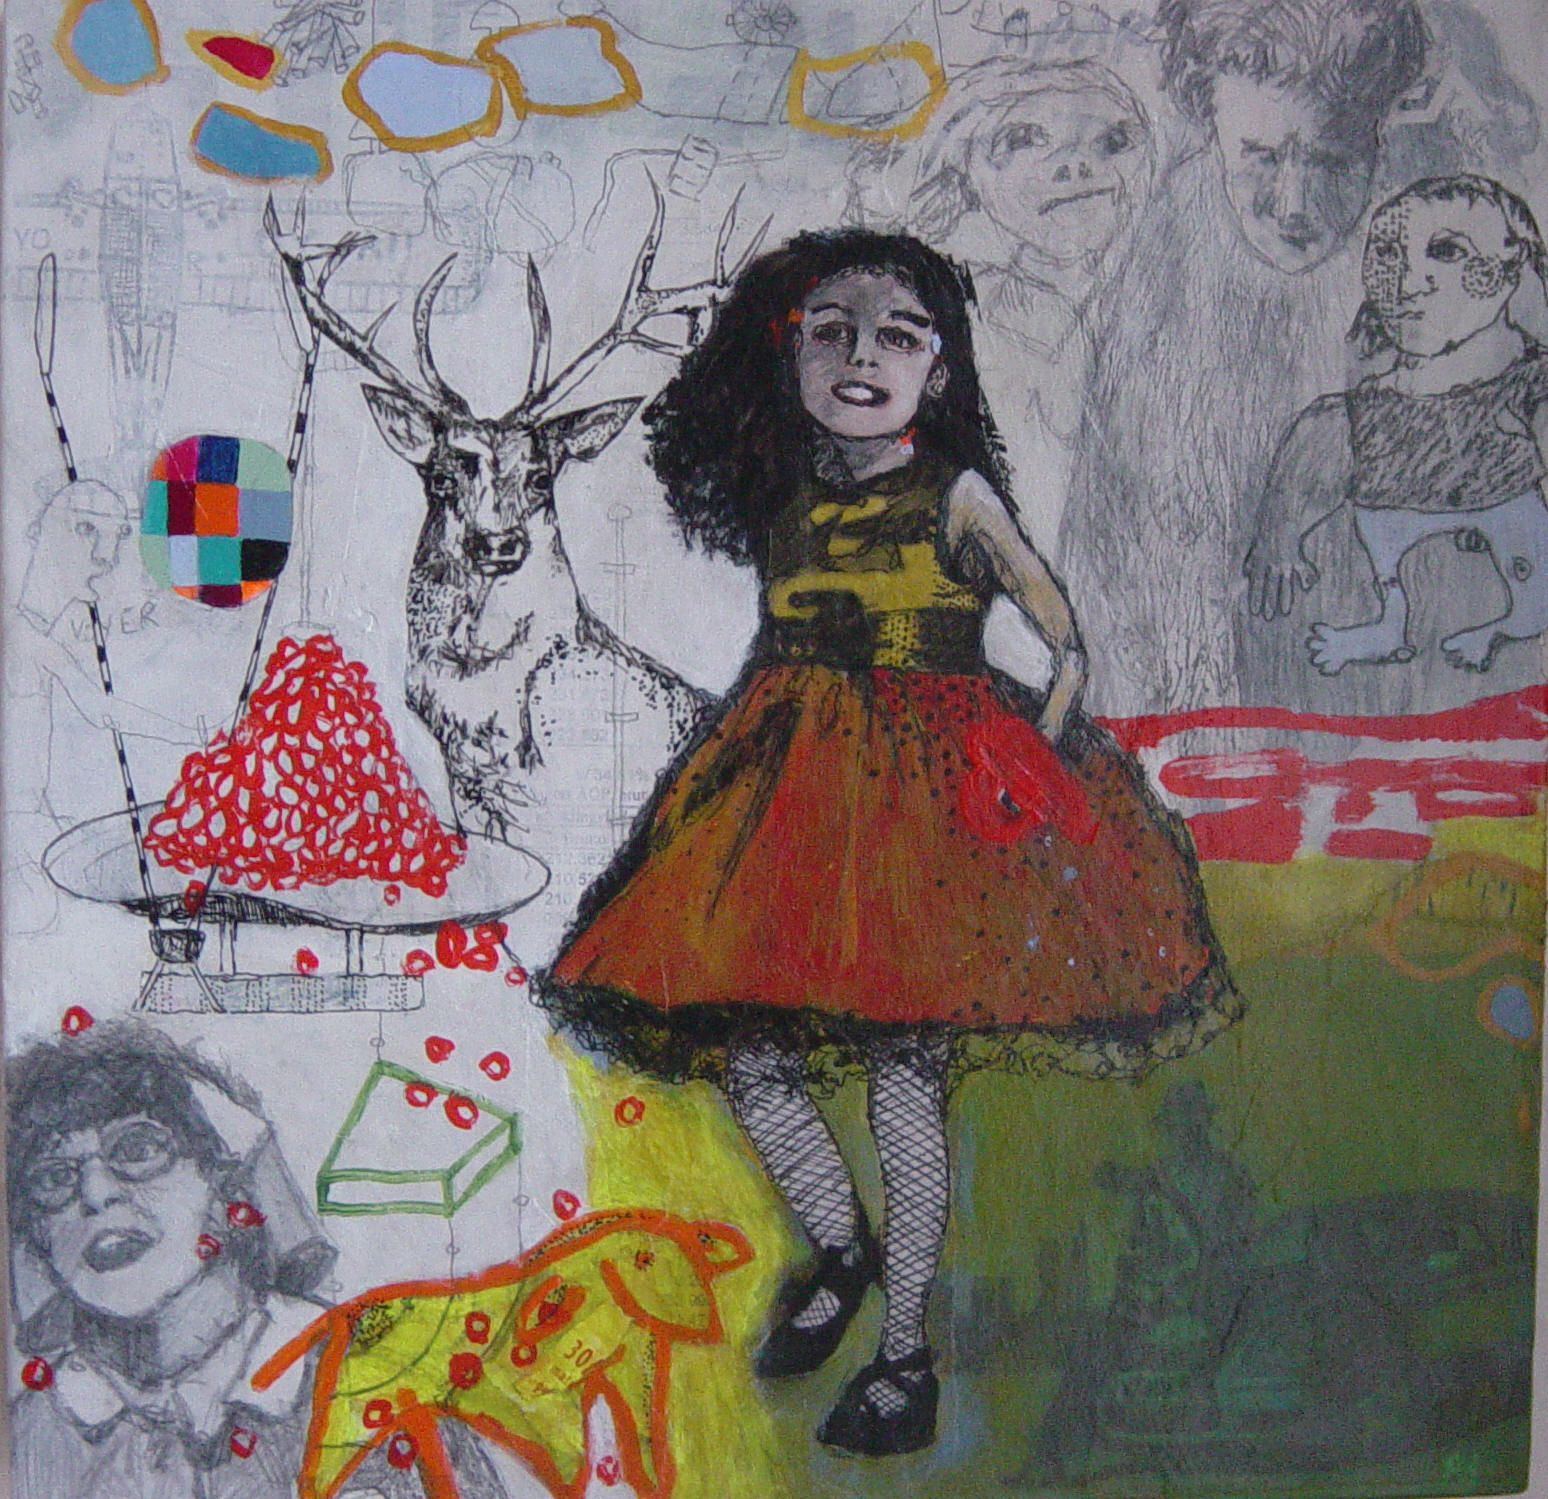 Innocentinvisibility (or Whose little girl are you?) (30 x 30 cm)